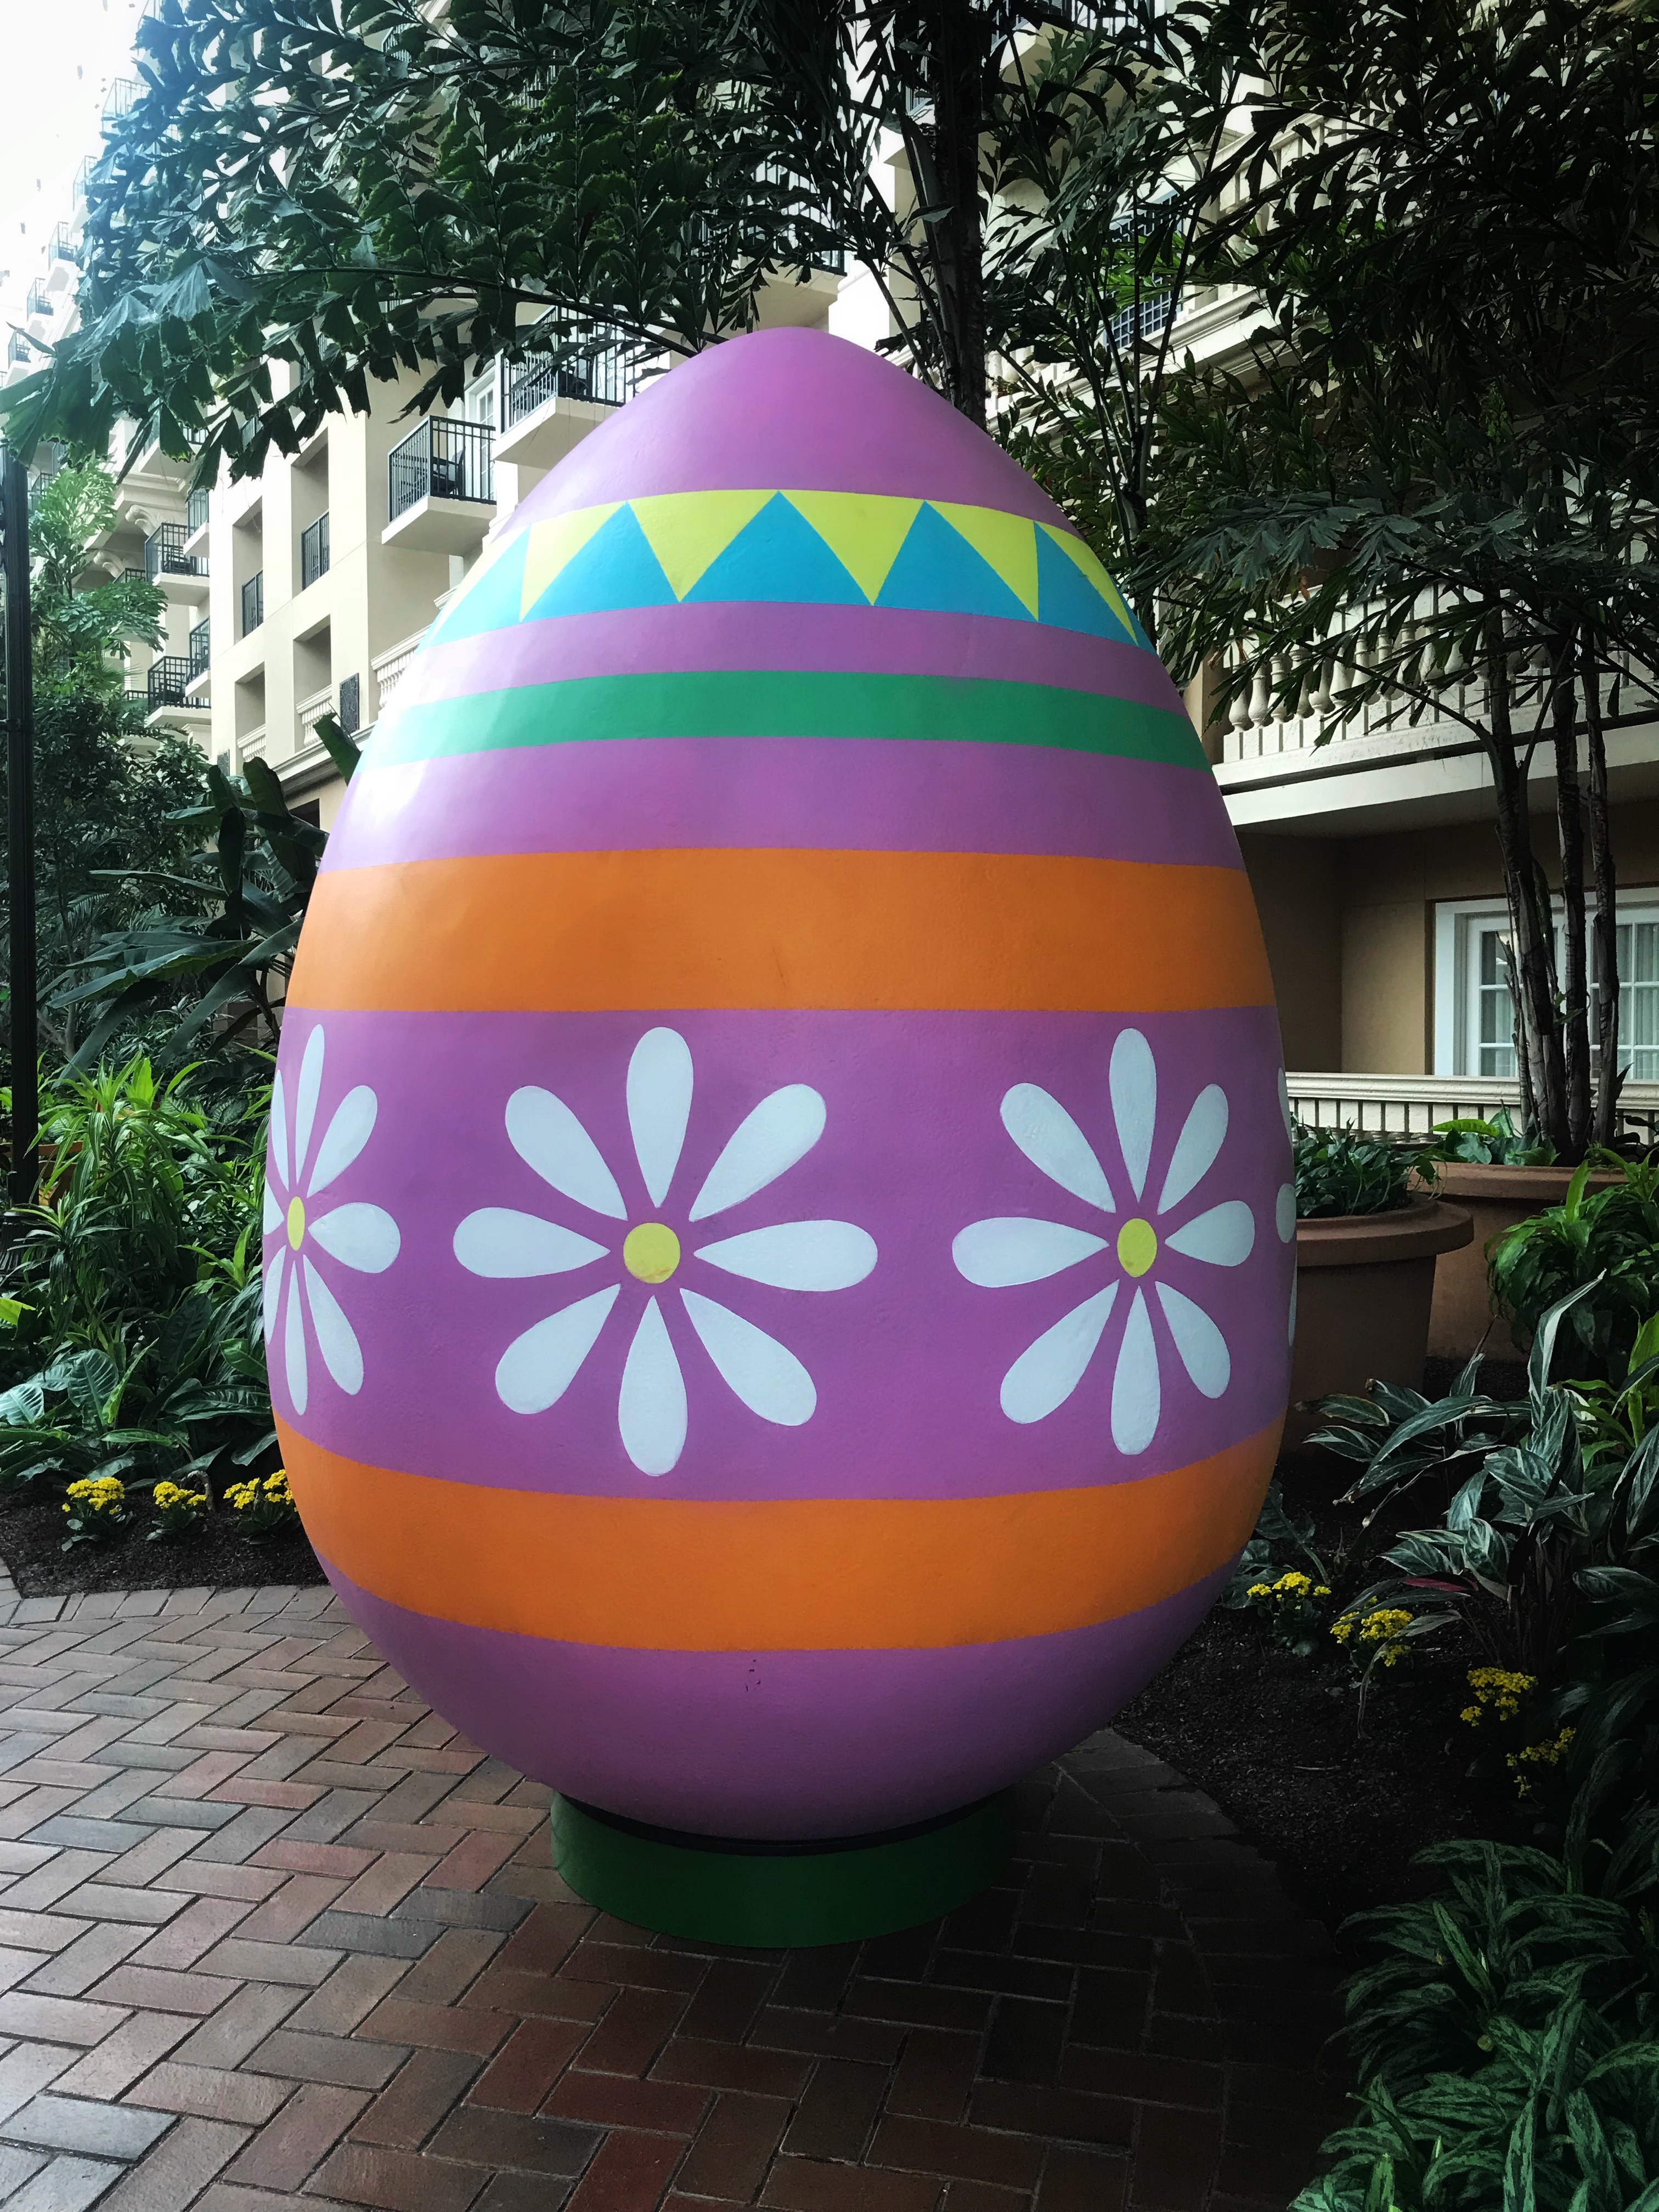 Gaylord Palms Resort for Easter